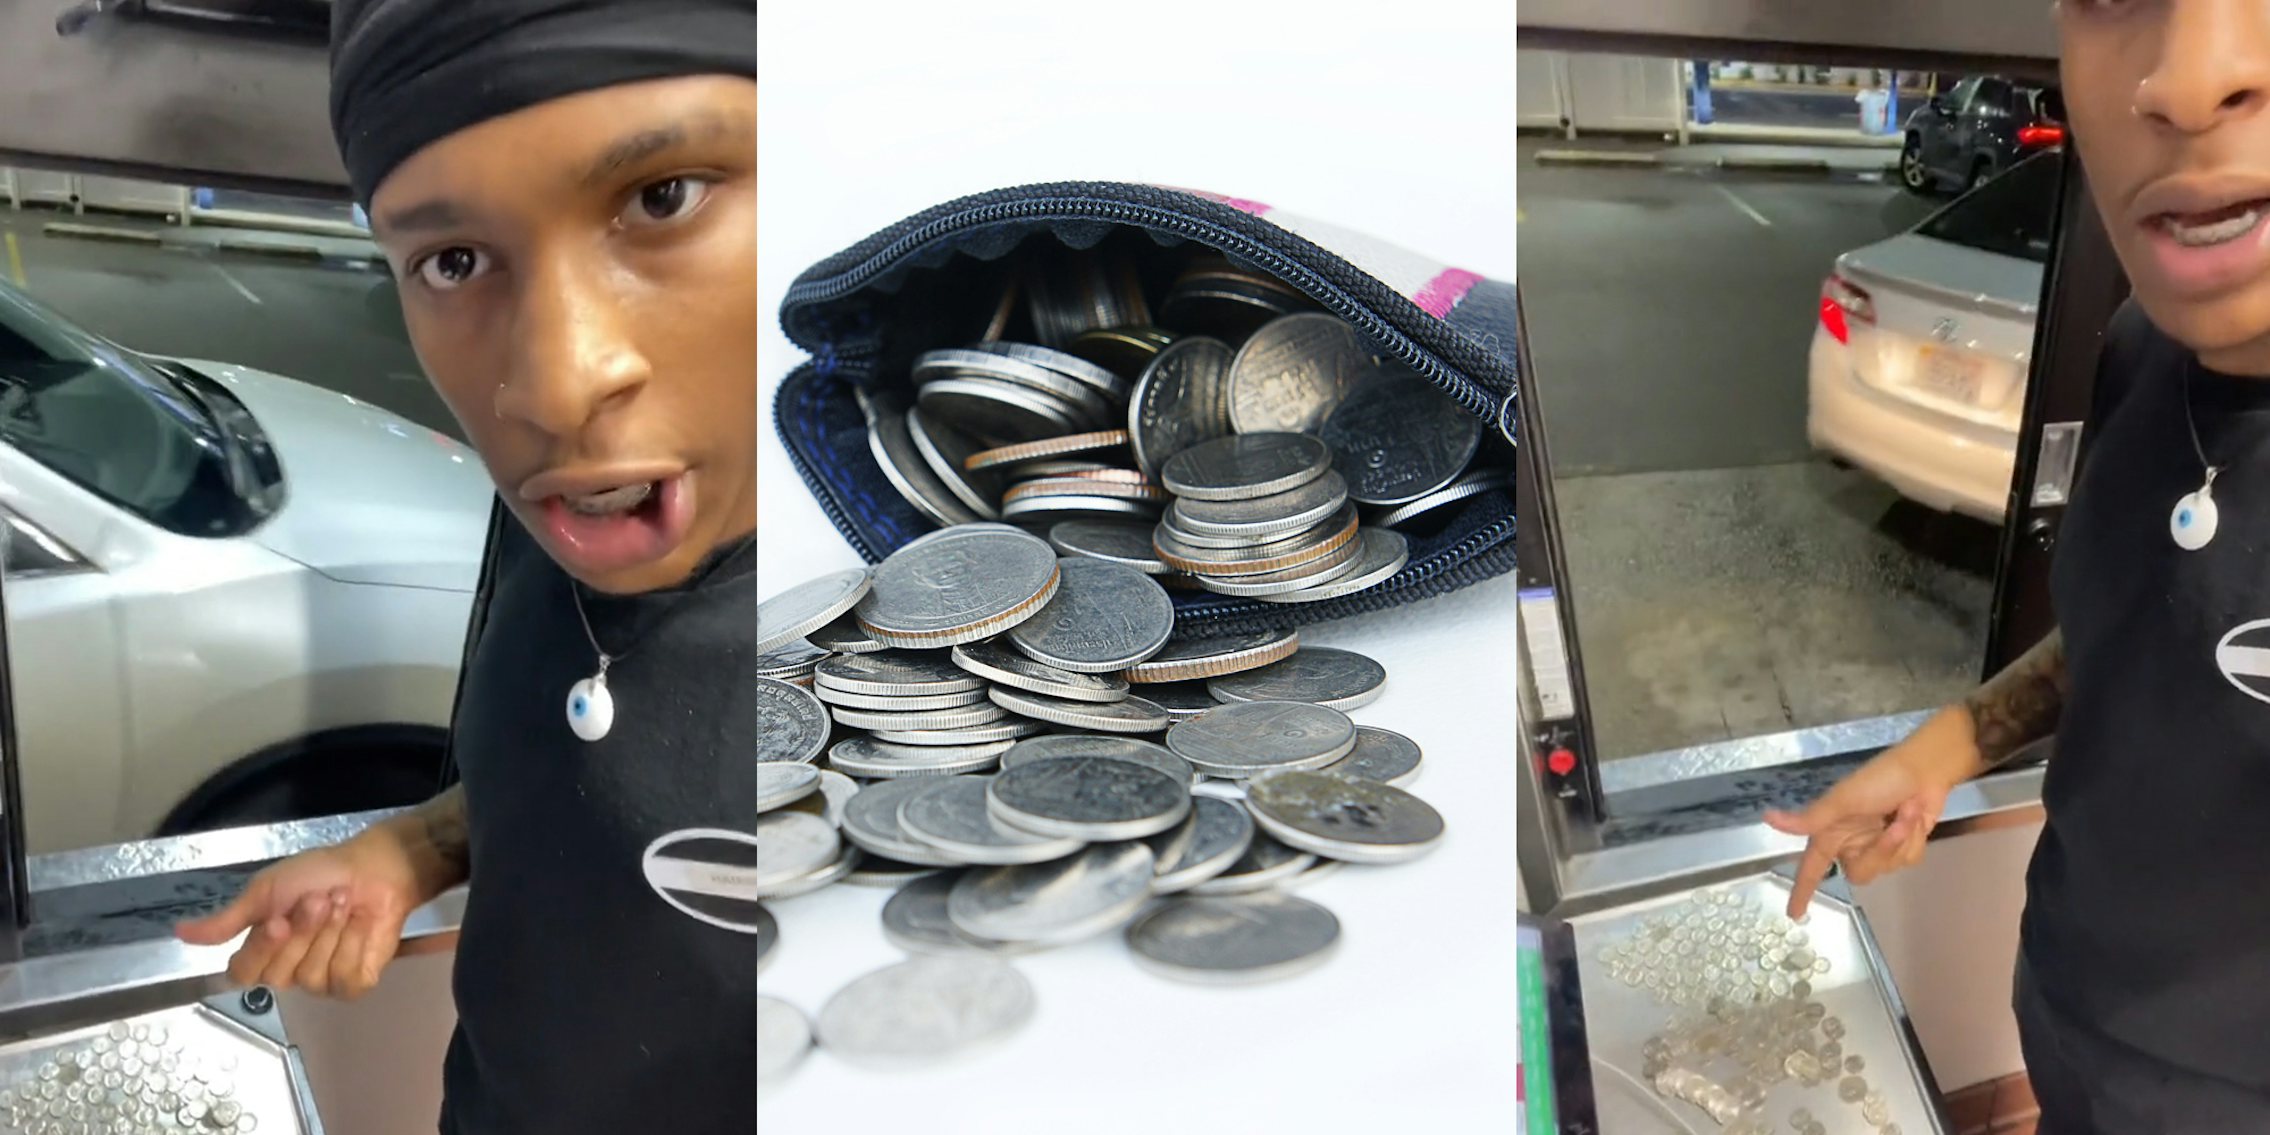 drive thru worker speaking next to change on counter (l) change spilling out of coin purse on white surface (c) drive thru worker speaking next to change on counter (r)